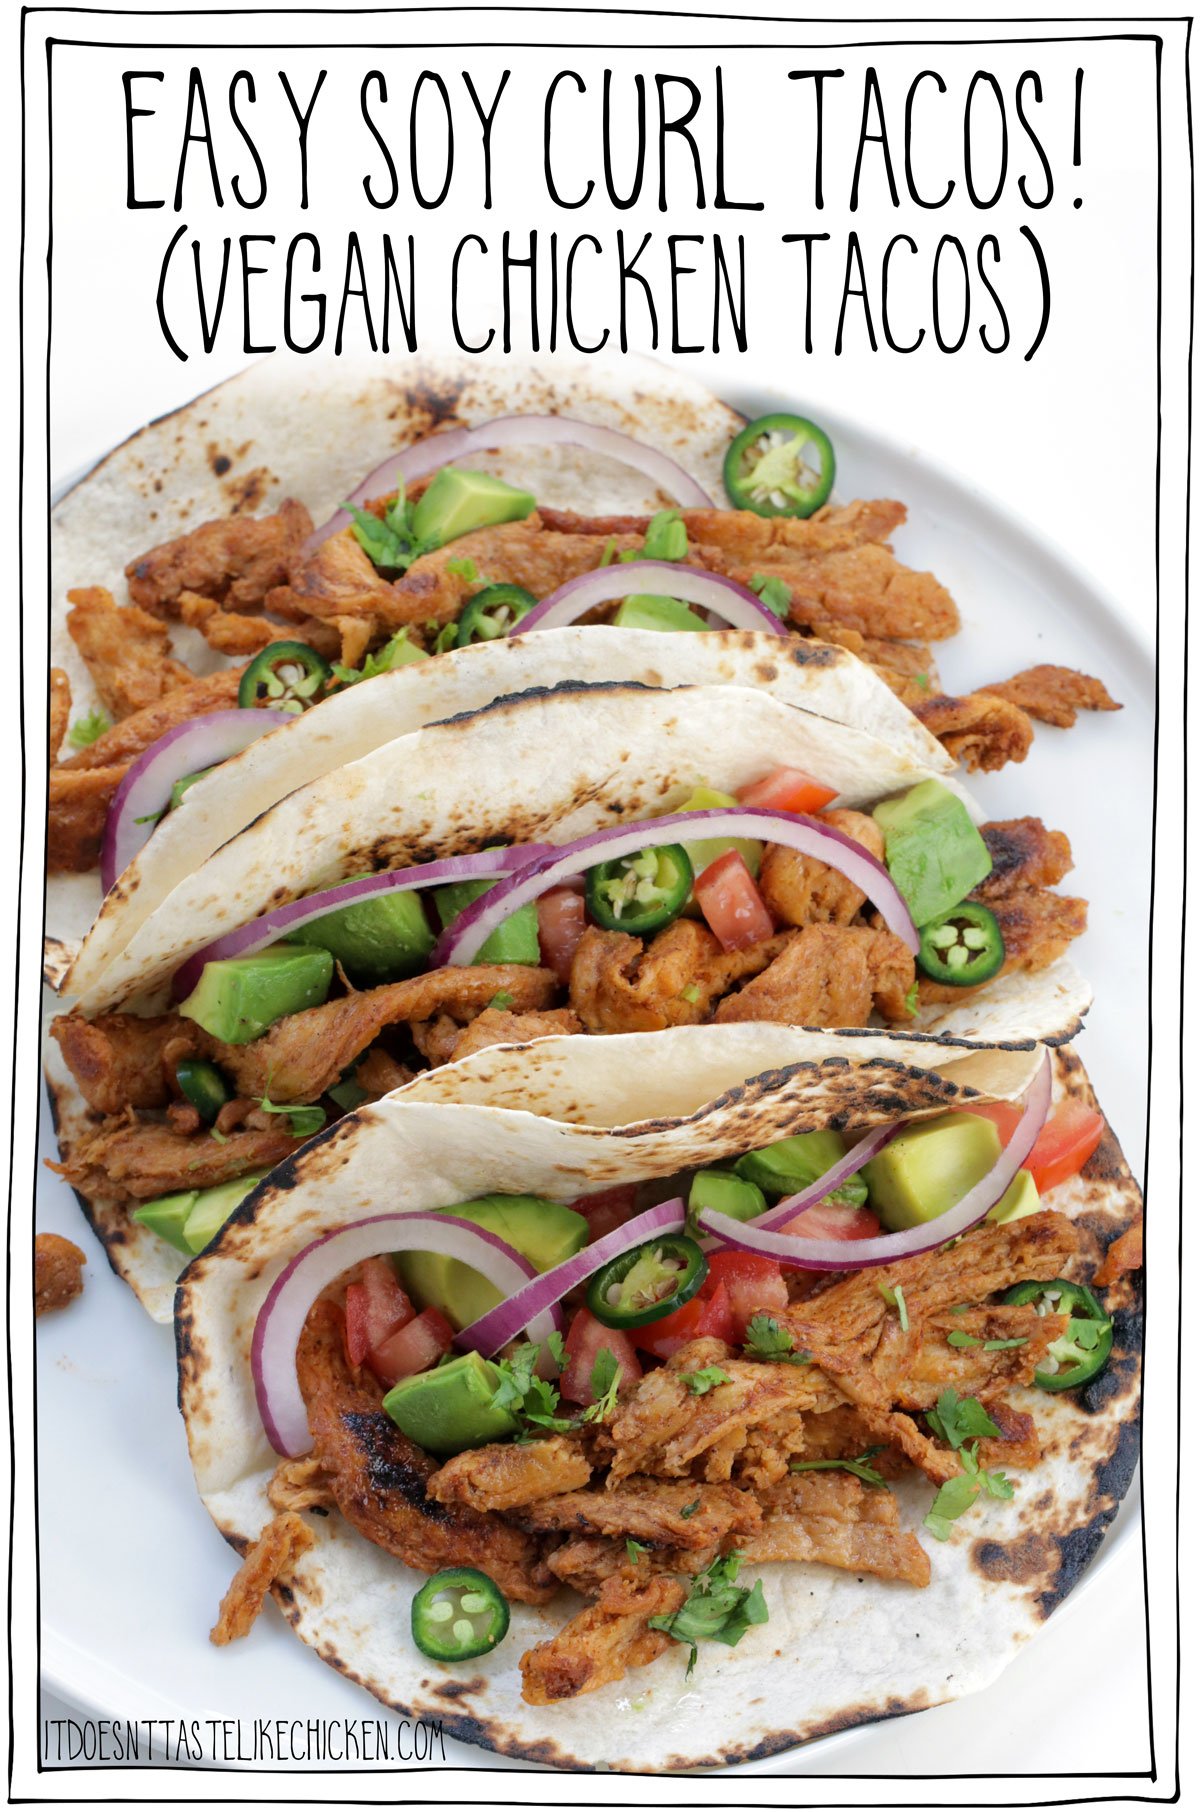 Easy Soy Curl Tacos! (Vegan Chicken Tacos). Just 20 minutes to make, these soy curl tacos are juicy, tender, chewy, and bursting with flavour! The perfect vegan chicken taco! Gluten-free and oil-free options. #itdoesnttastelikechicken #veganrecipe #tacos